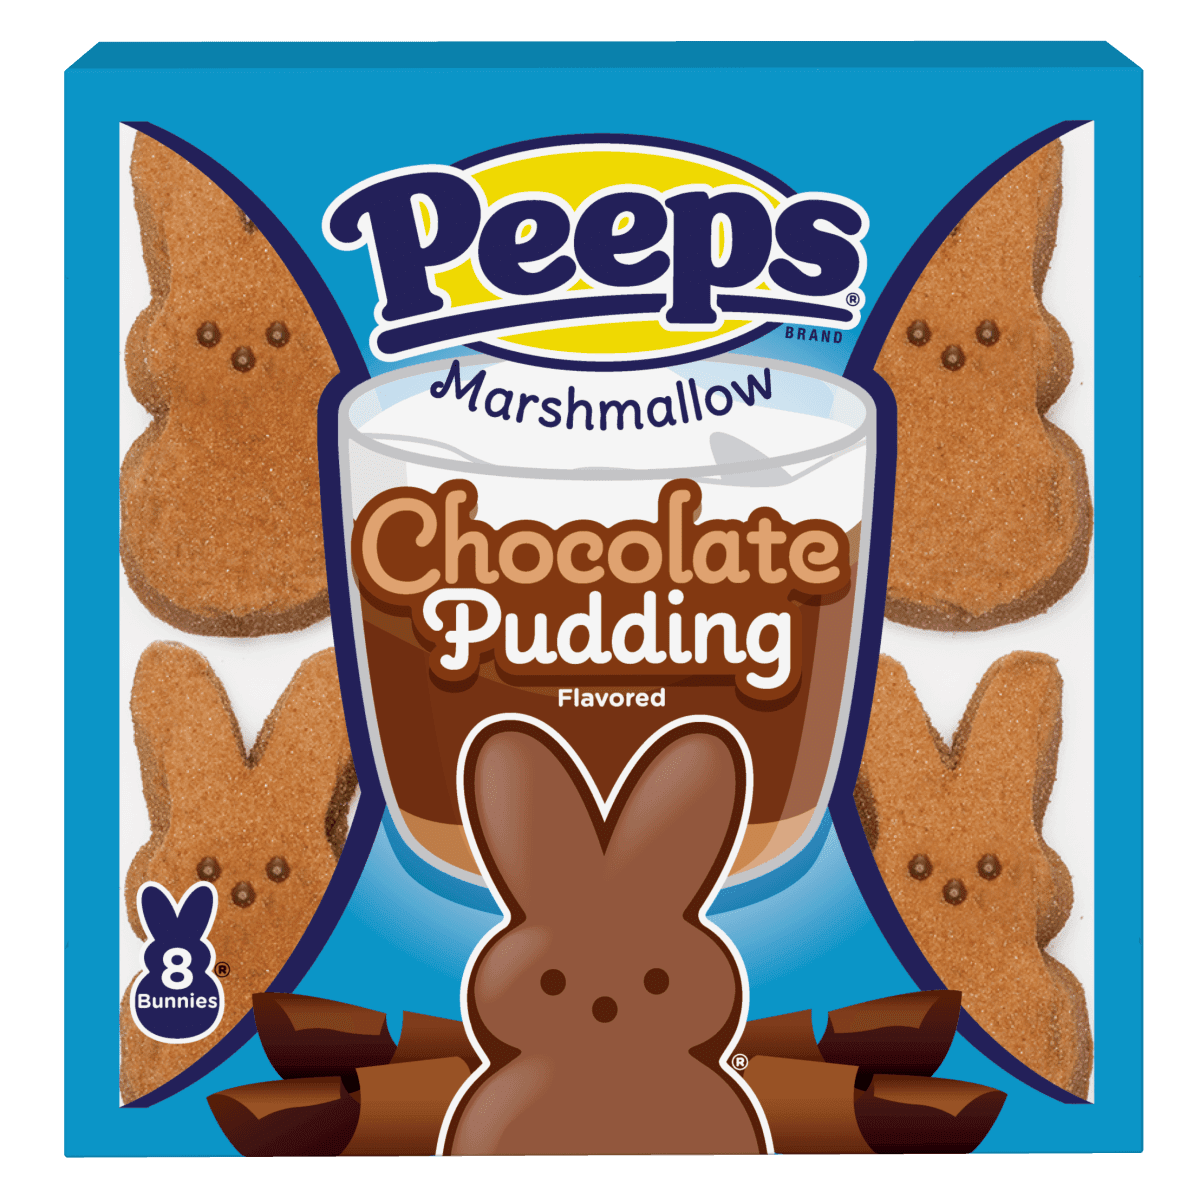 Peeps Chocolate Pudding Bunnies 8 count pack